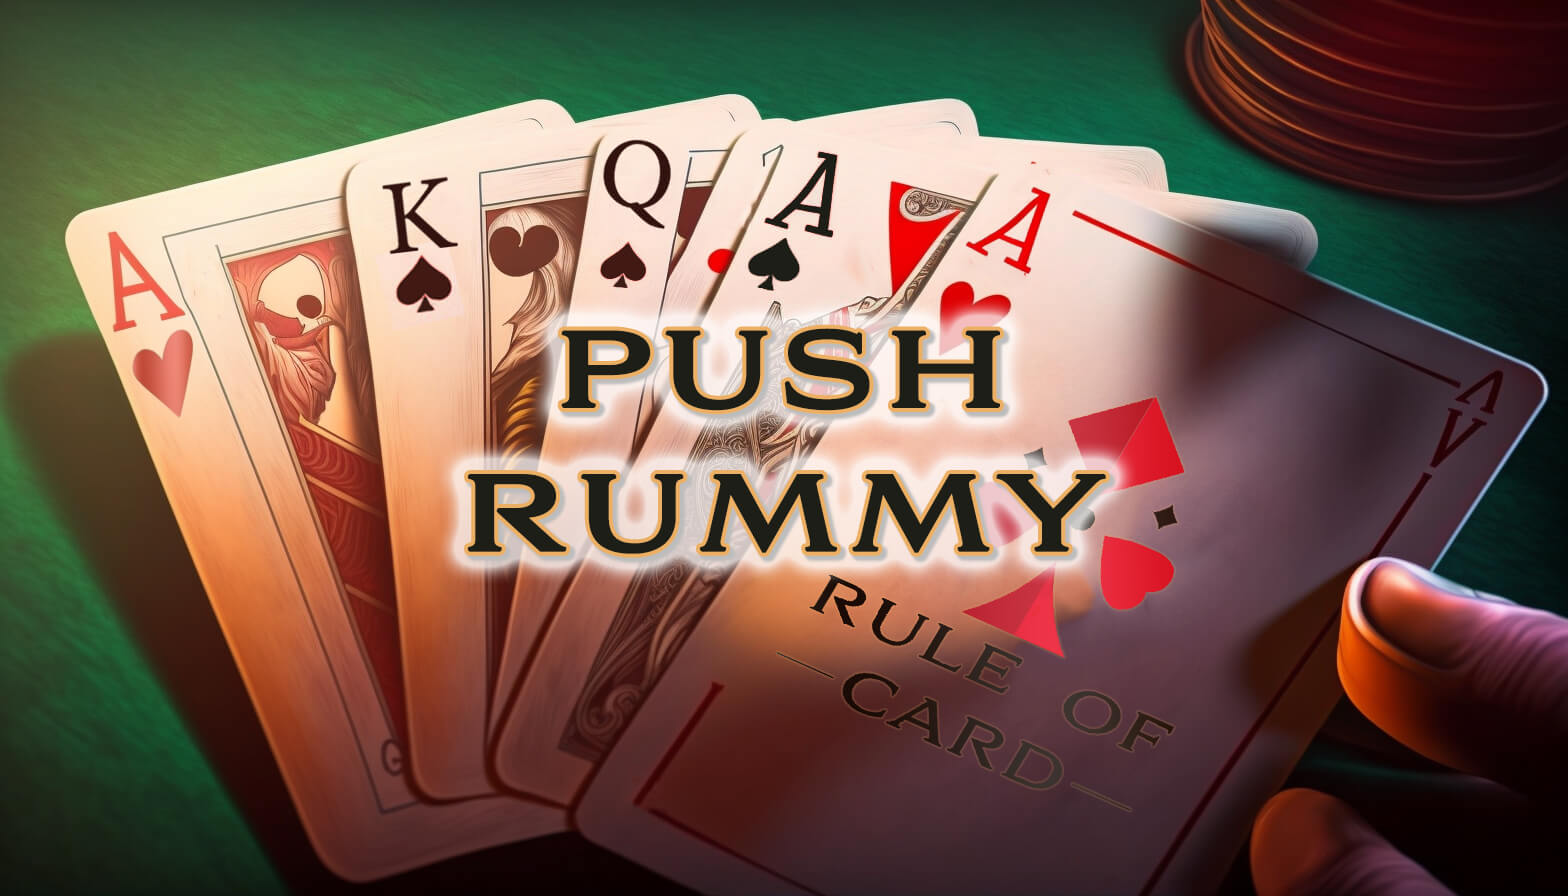 Playing the card game Push Rummy